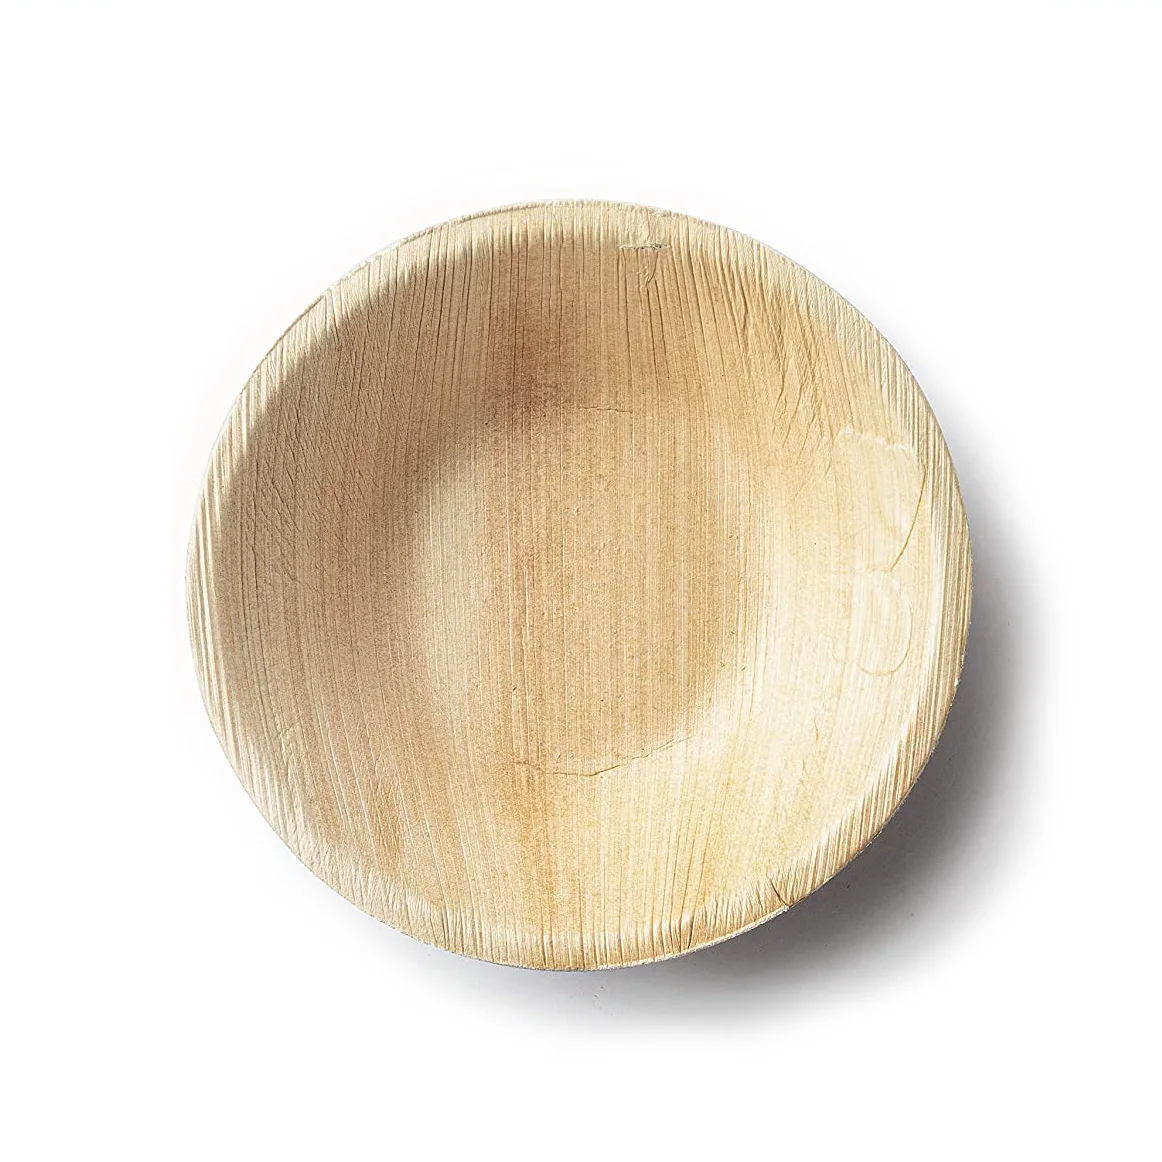 6inch disposable biodegradable compostable areca palm leaf tableware wooden plates tray deep bowl